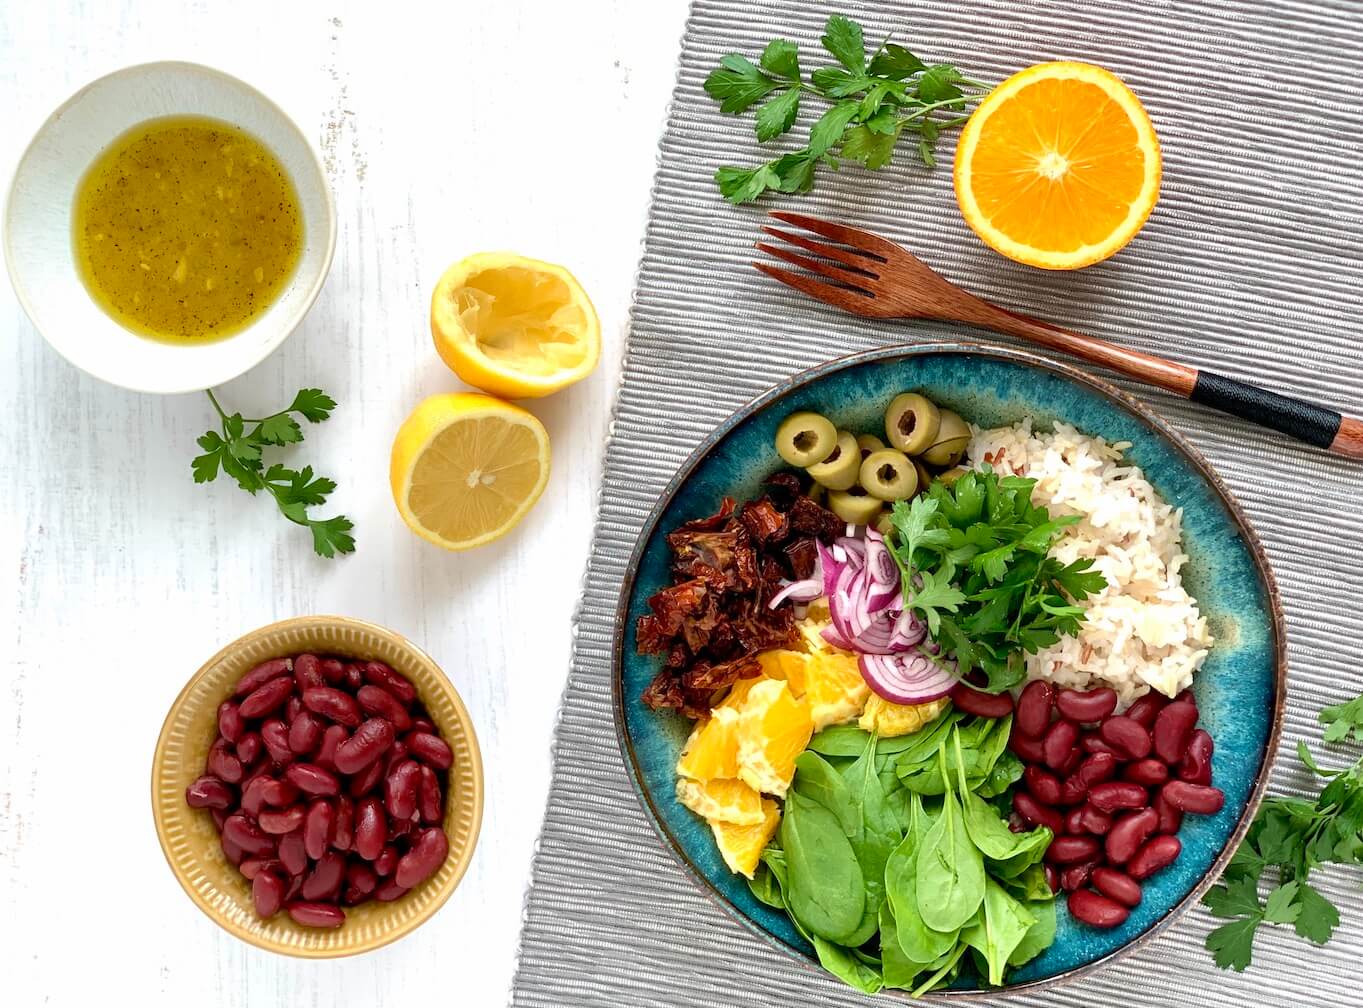 vegan Buddha bowl with whole foods, brown rice, kidney beans, spinach, orange, olives, red onion, sun-dried tomatoes, lemon, parsley